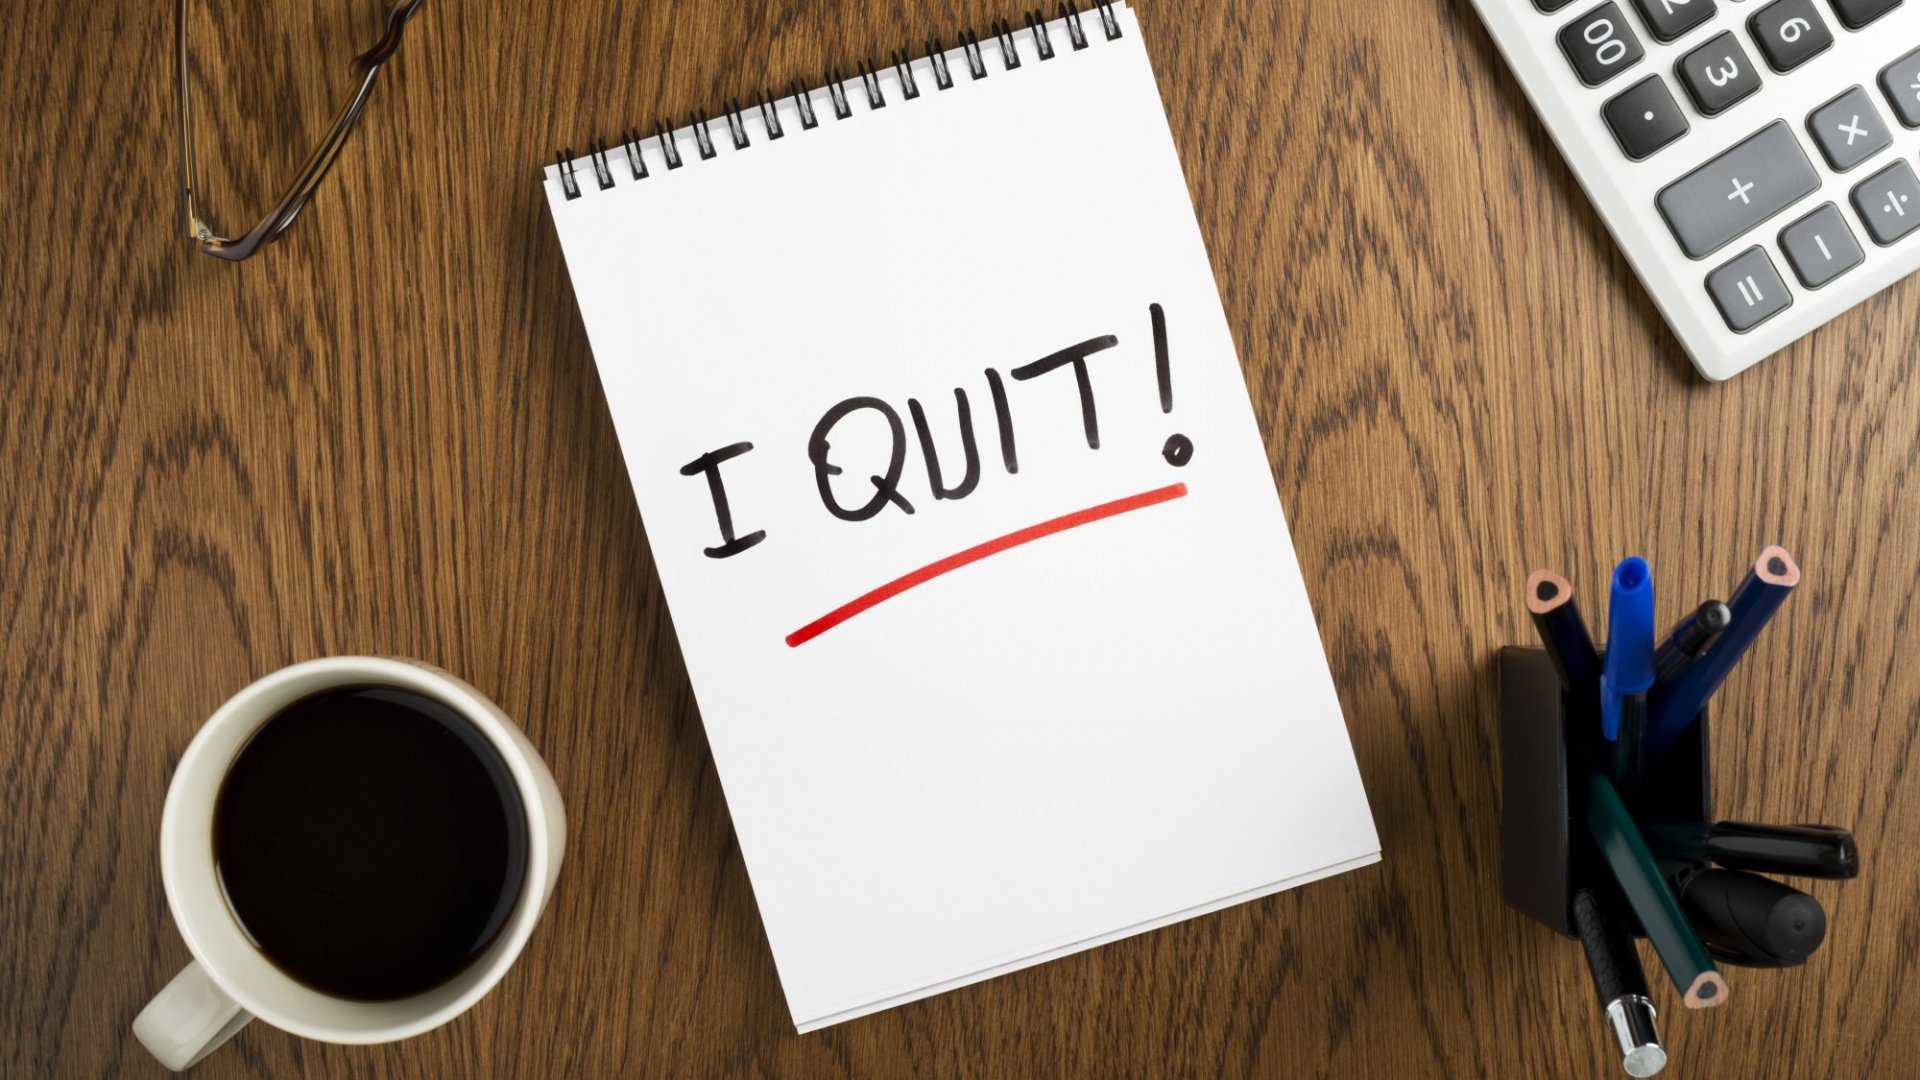 6 Steps To Take If You're Planning To Quit Your Job